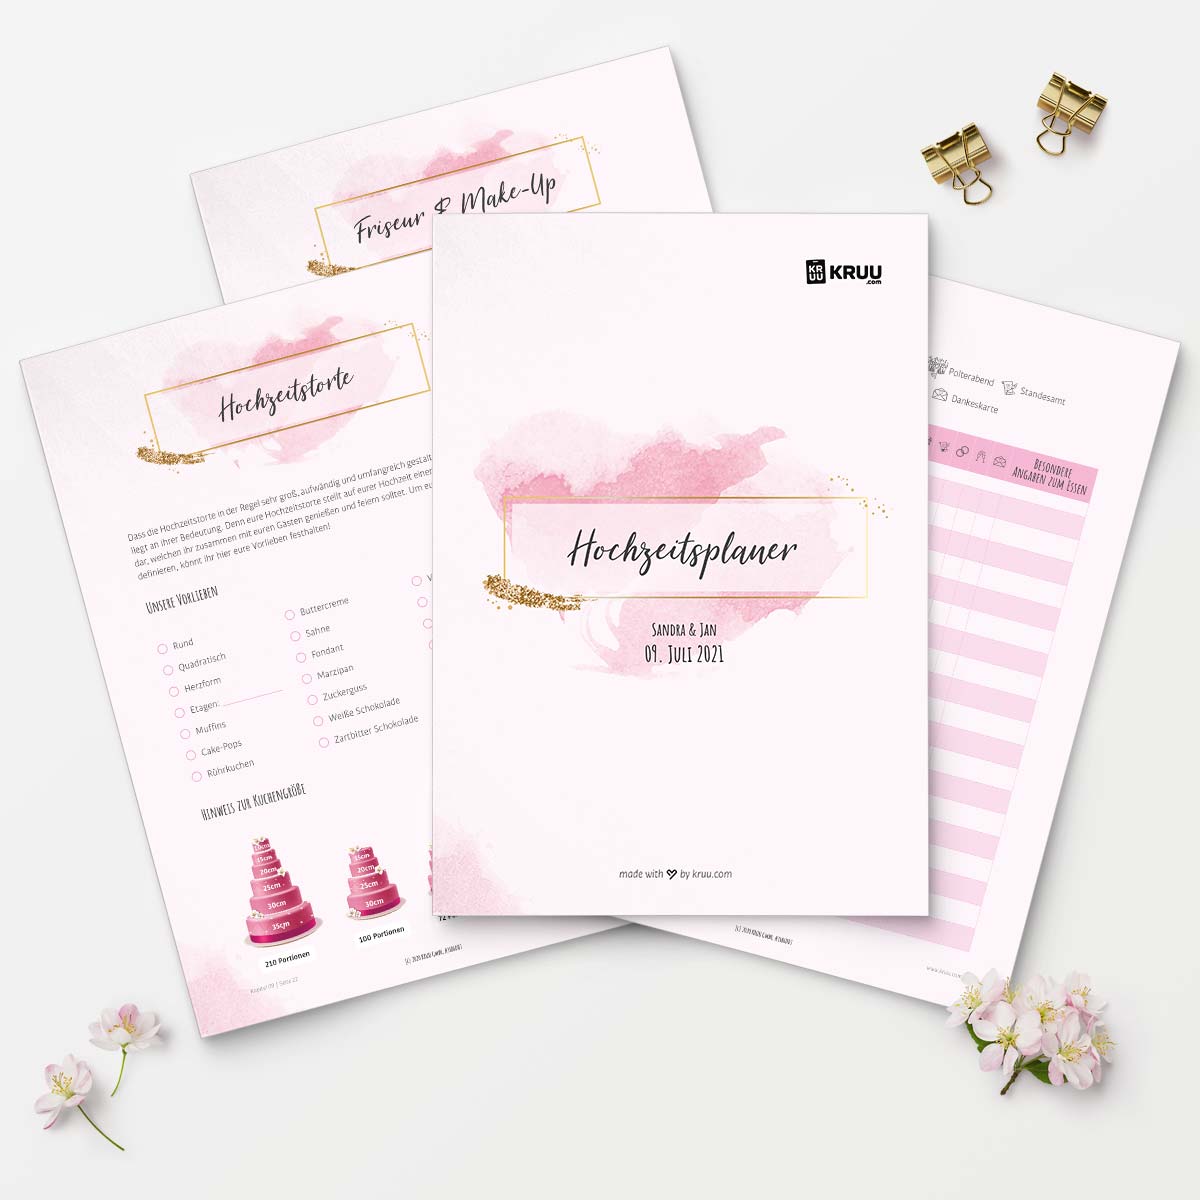 1677095545 419 Free Wedding Planner Personalize Download - Free Wedding Planner - Personalize & Download 📑